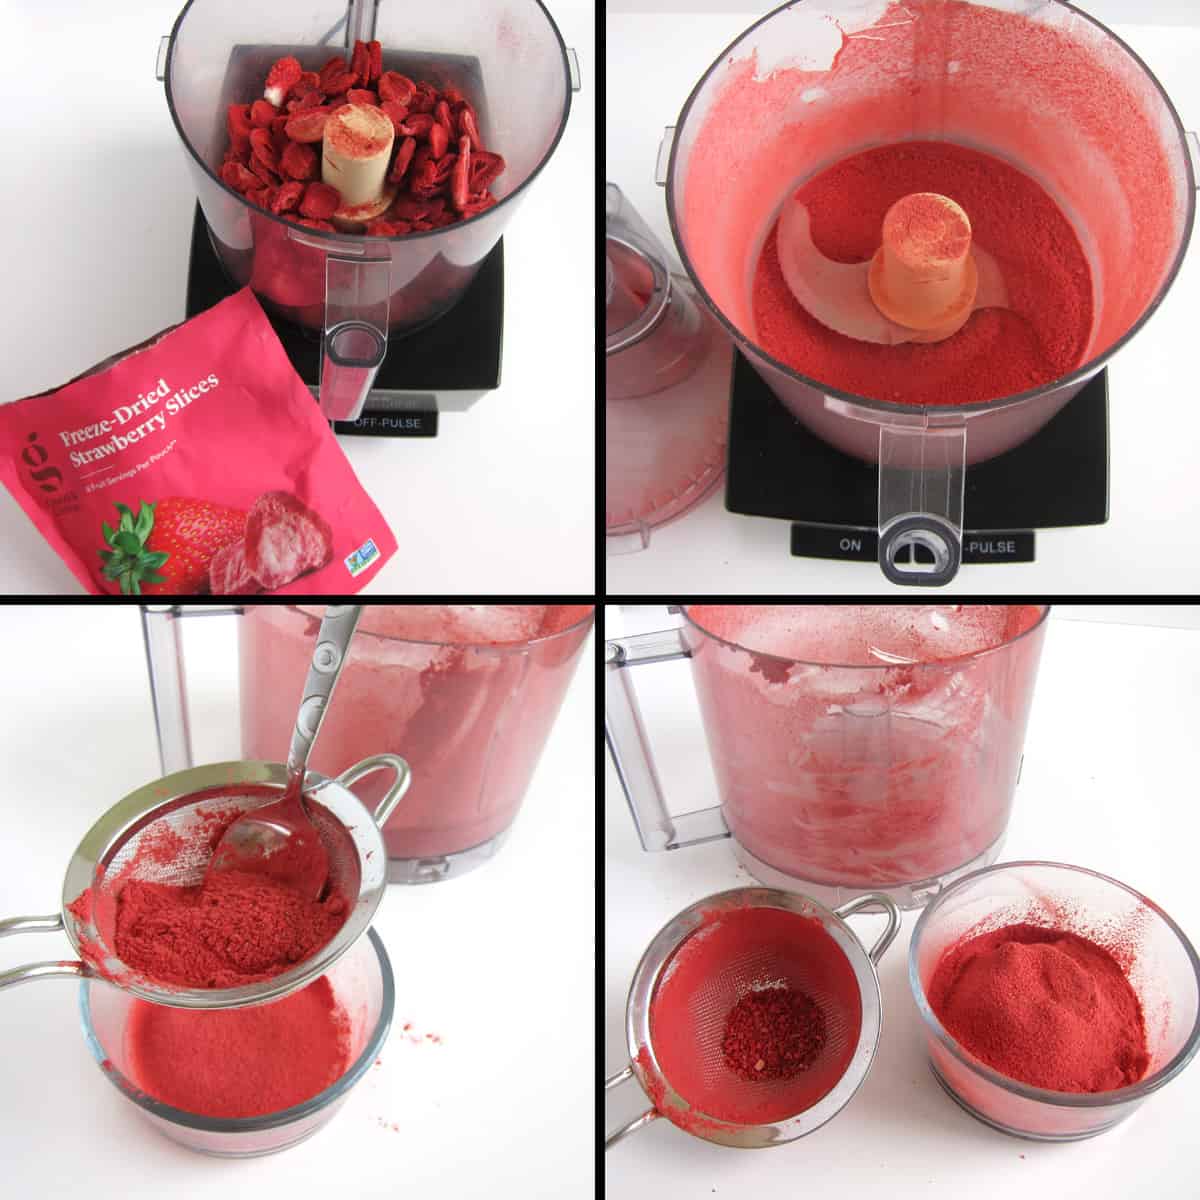 grind freeze-dried strawberries into powder using a food processor